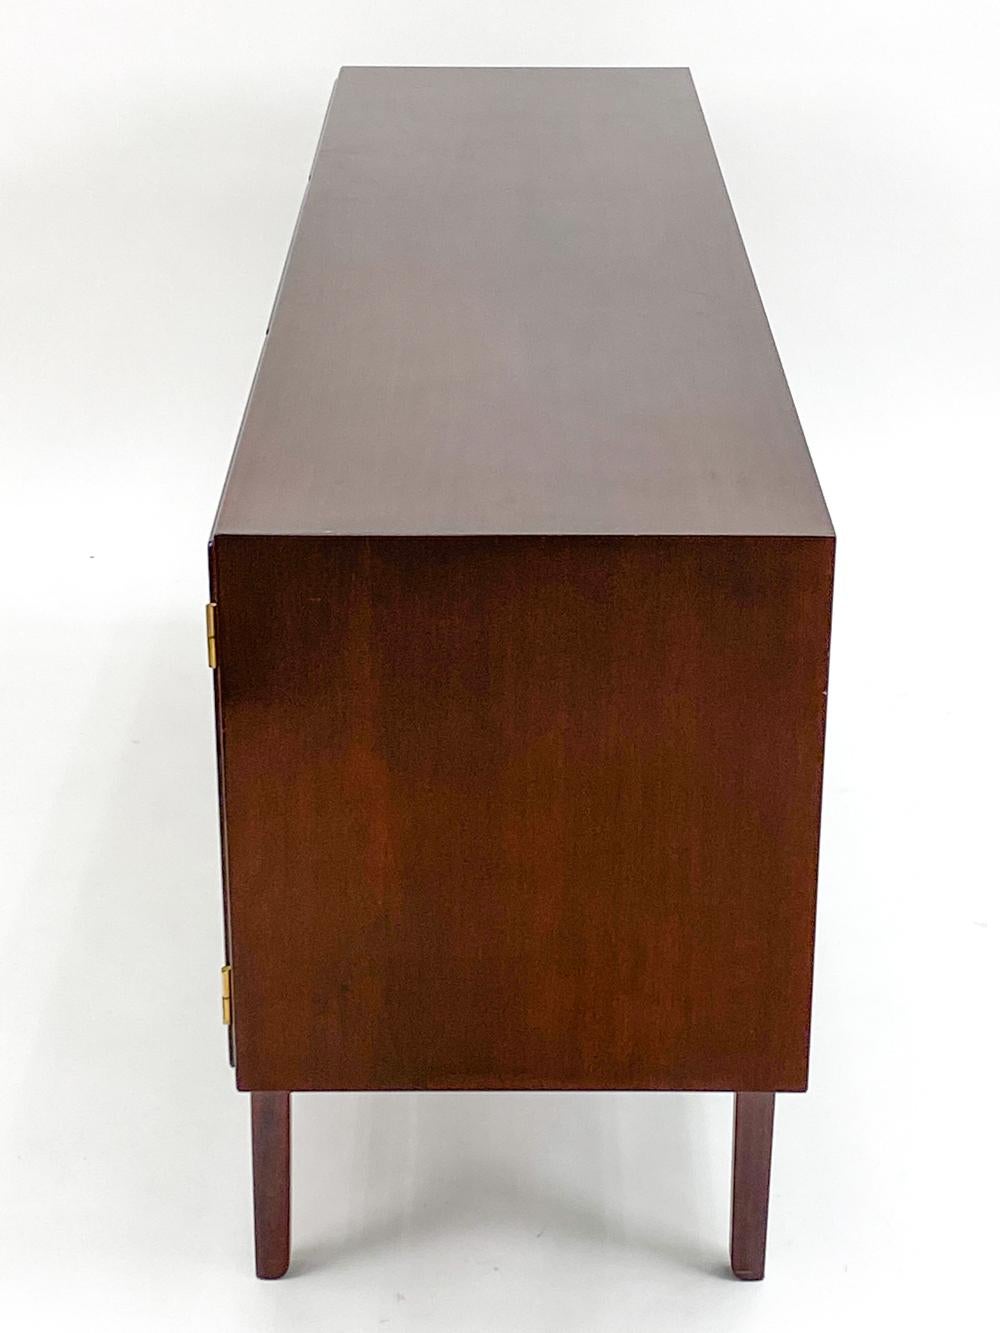 Ole Wanscher for Poul Jeppesen Rungstedlund Series Sideboard in Mahogany For Sale 1